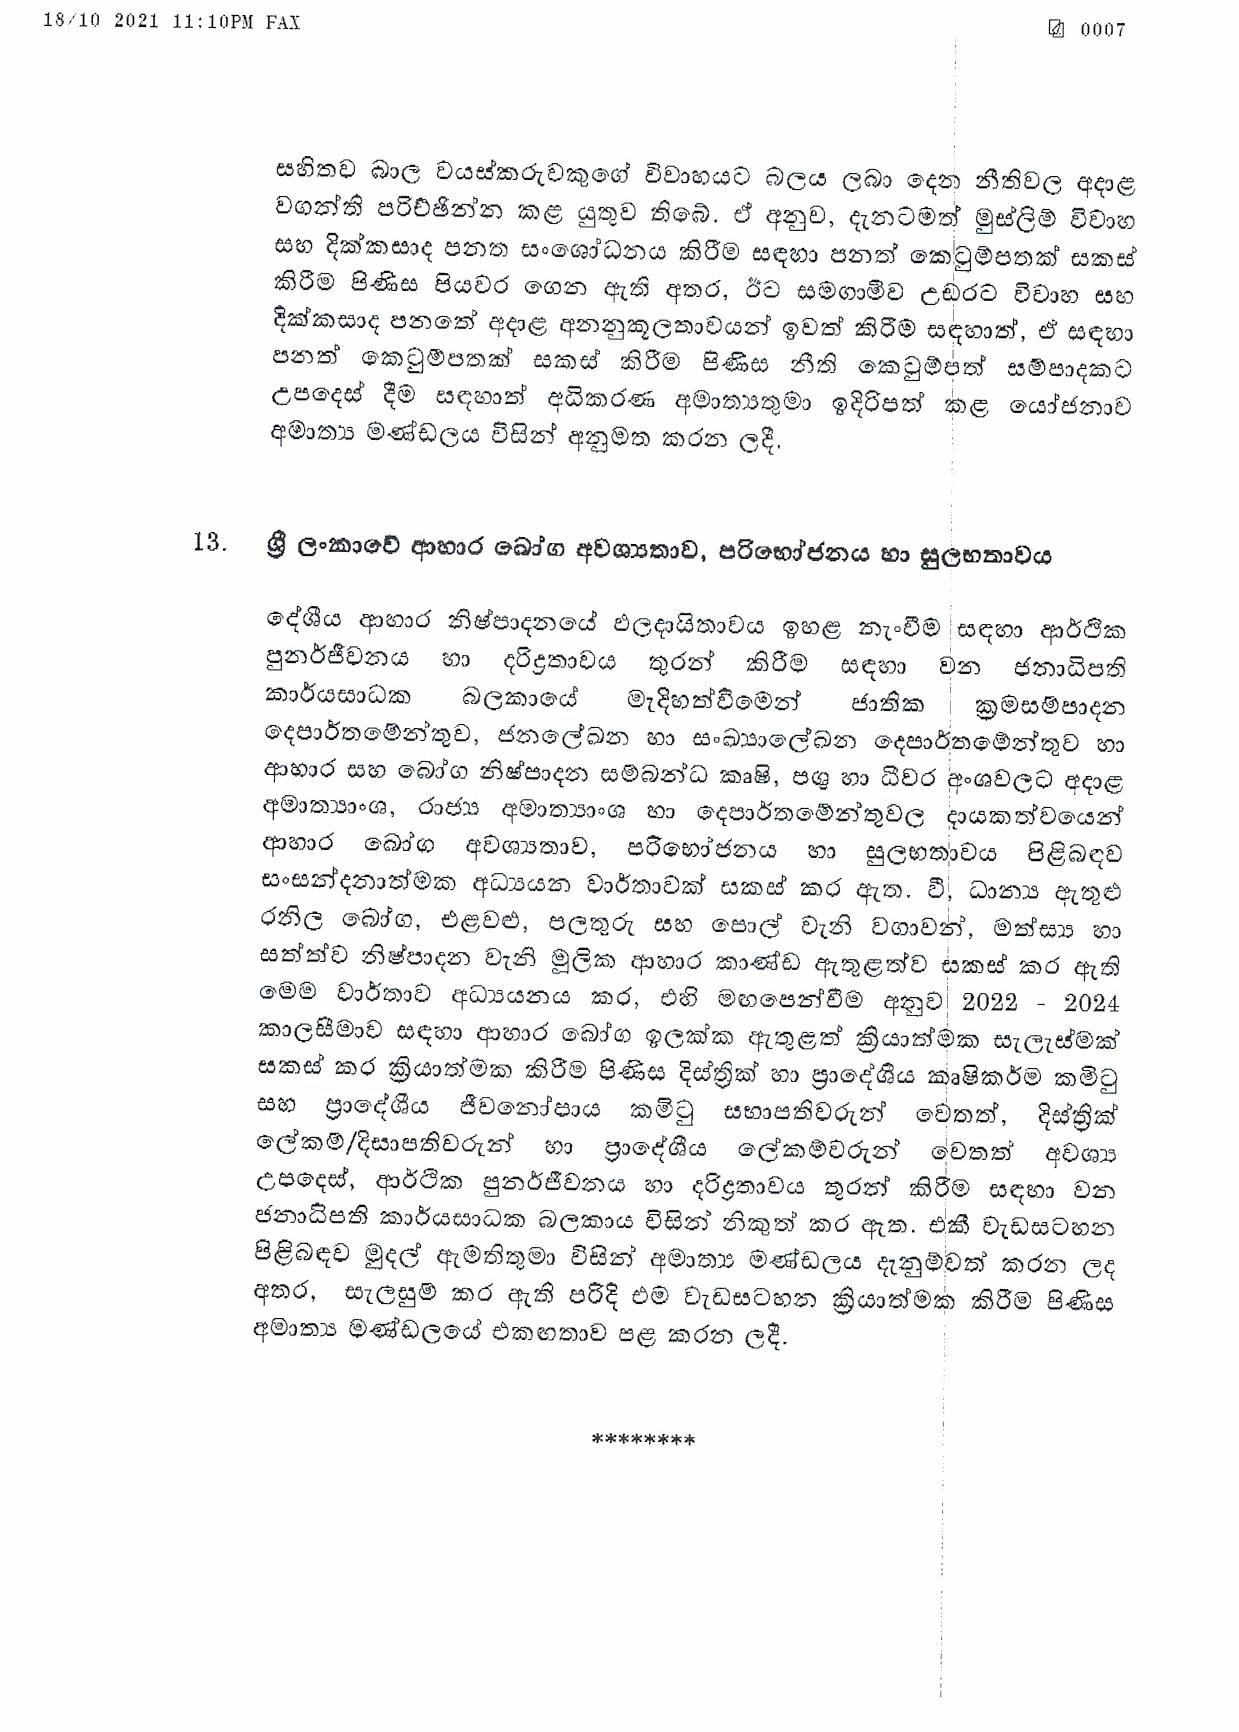 Cabinet Decision on 18.10.2021 Sinhala page 007